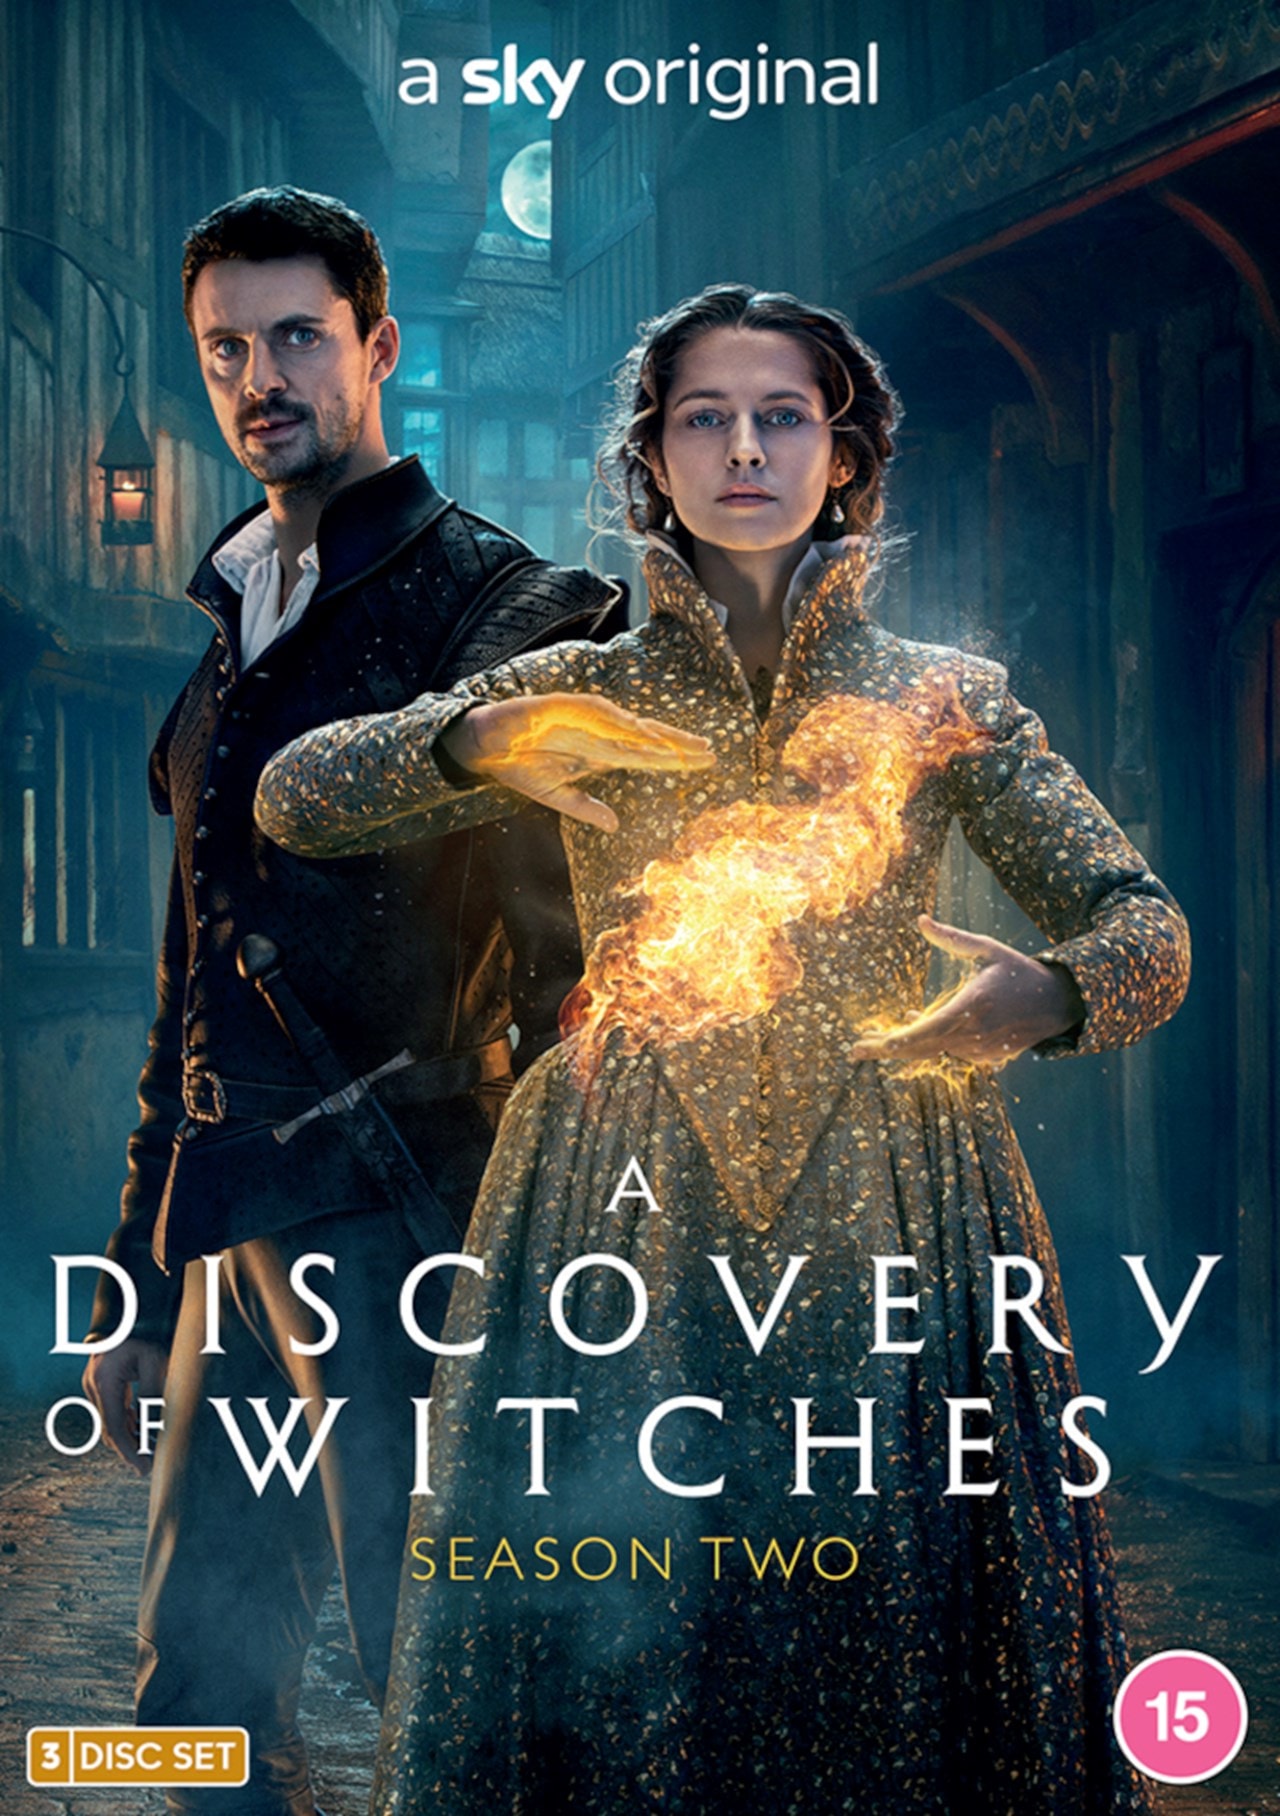 How To Watch Discovery Of Witches Season 2 For Free A Discovery of Witches: Season 2 | DVD Box Set | Free shipping over £20